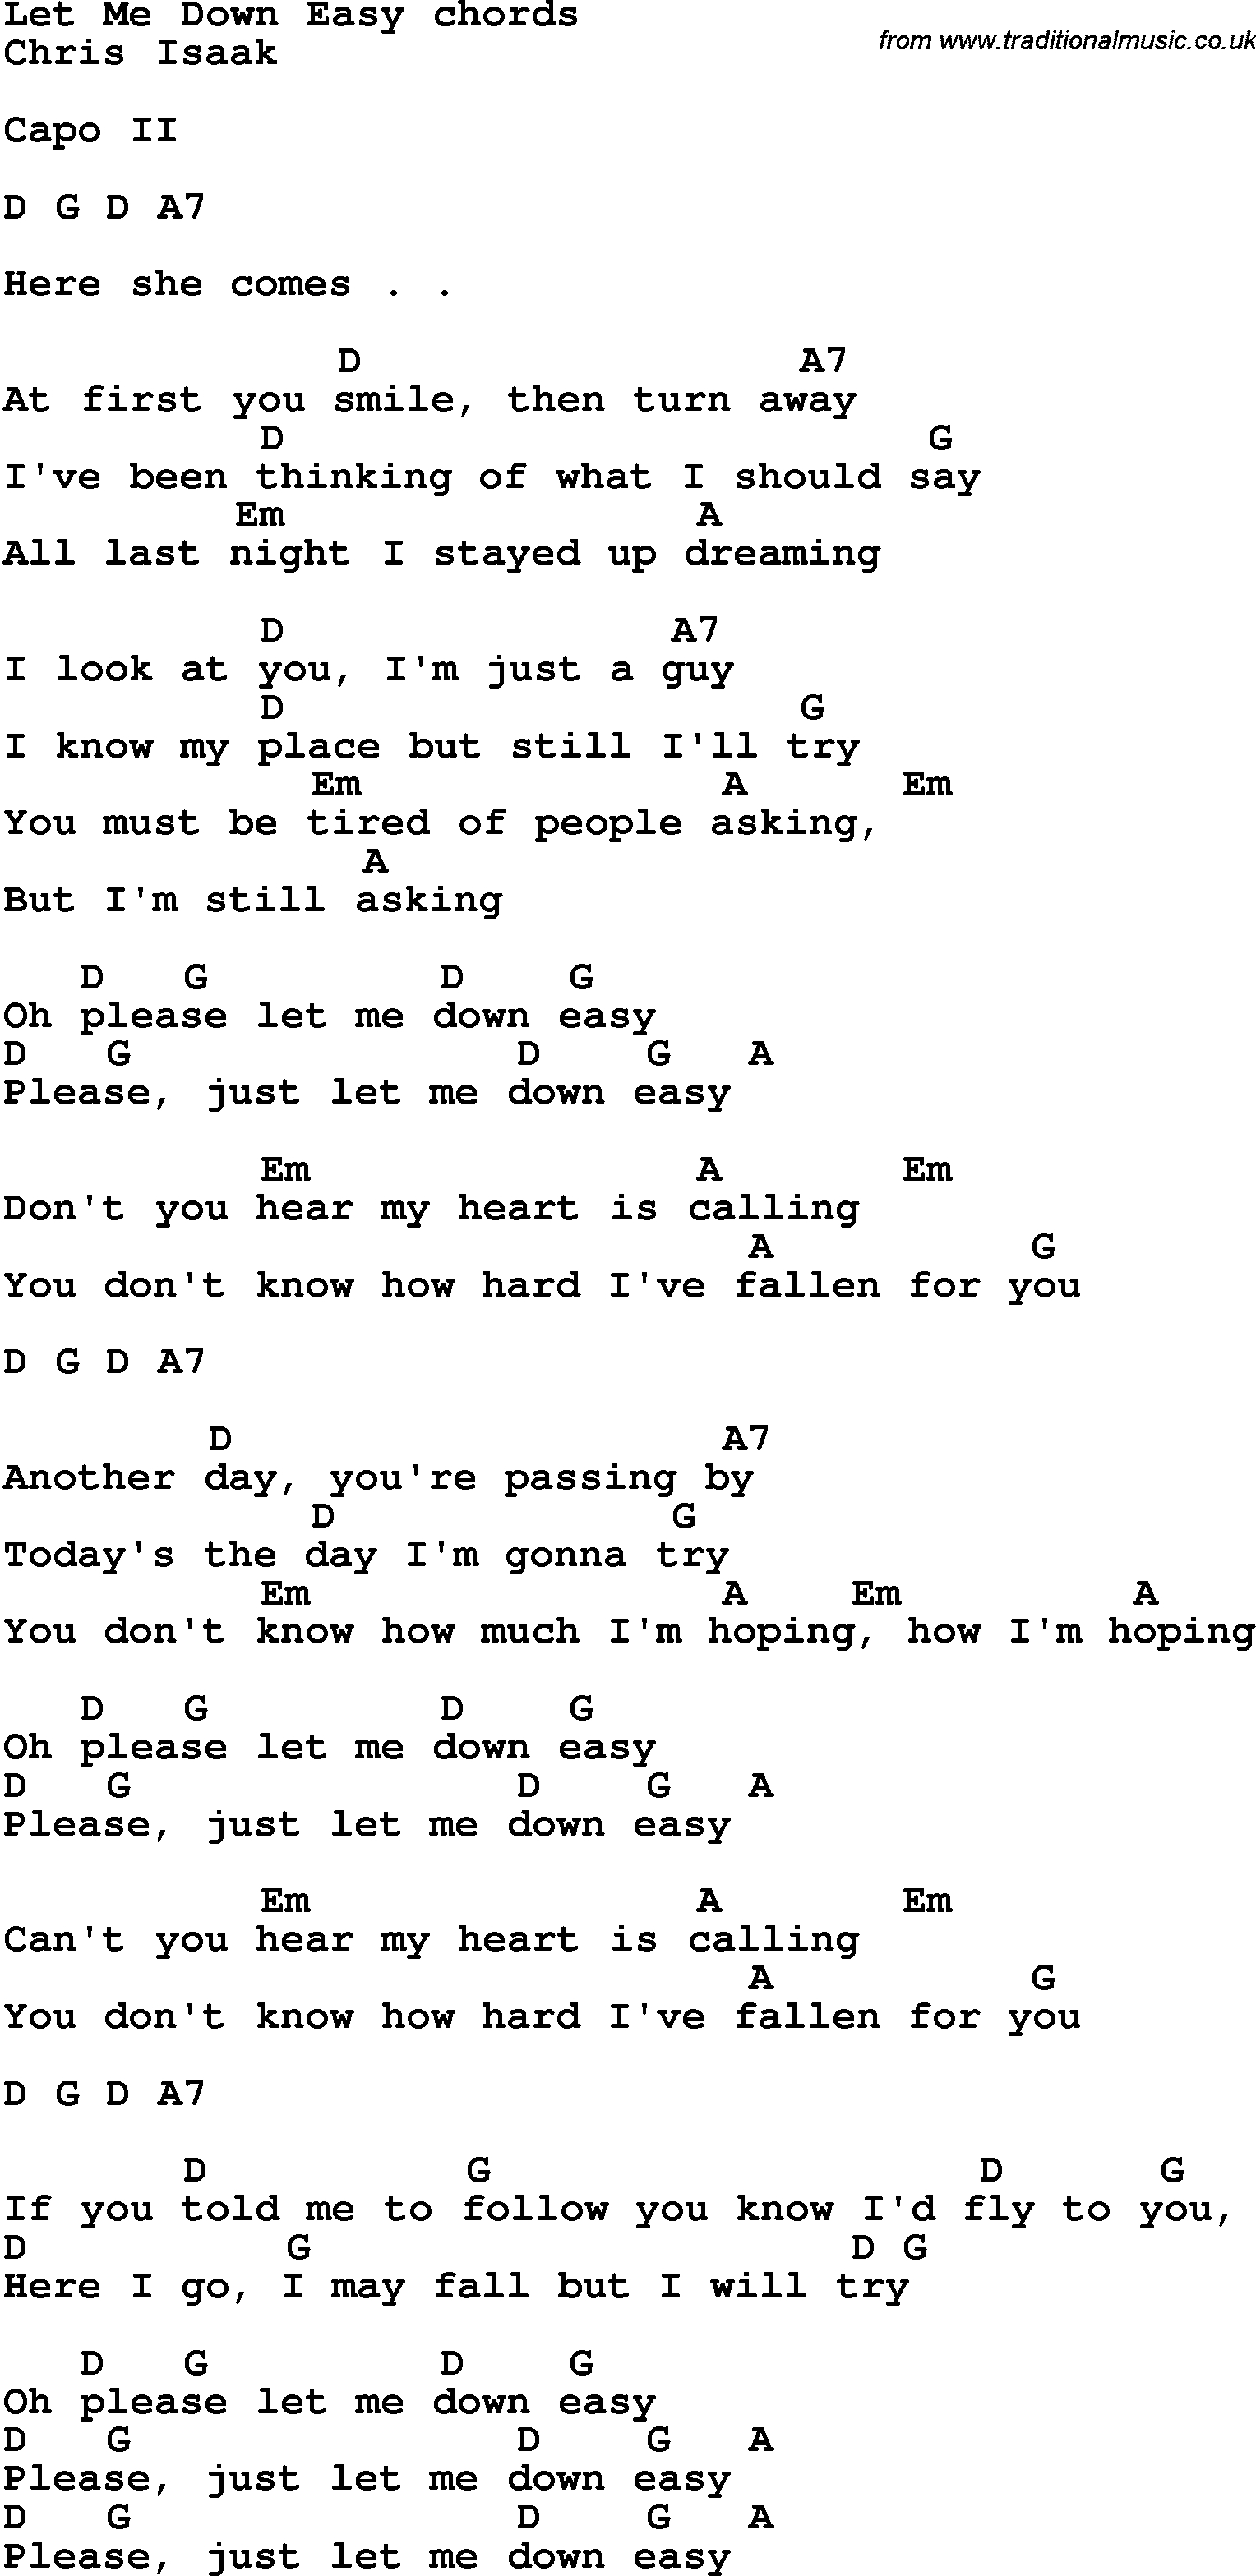 Song Lyrics with guitar chords for Let Me Down Easy